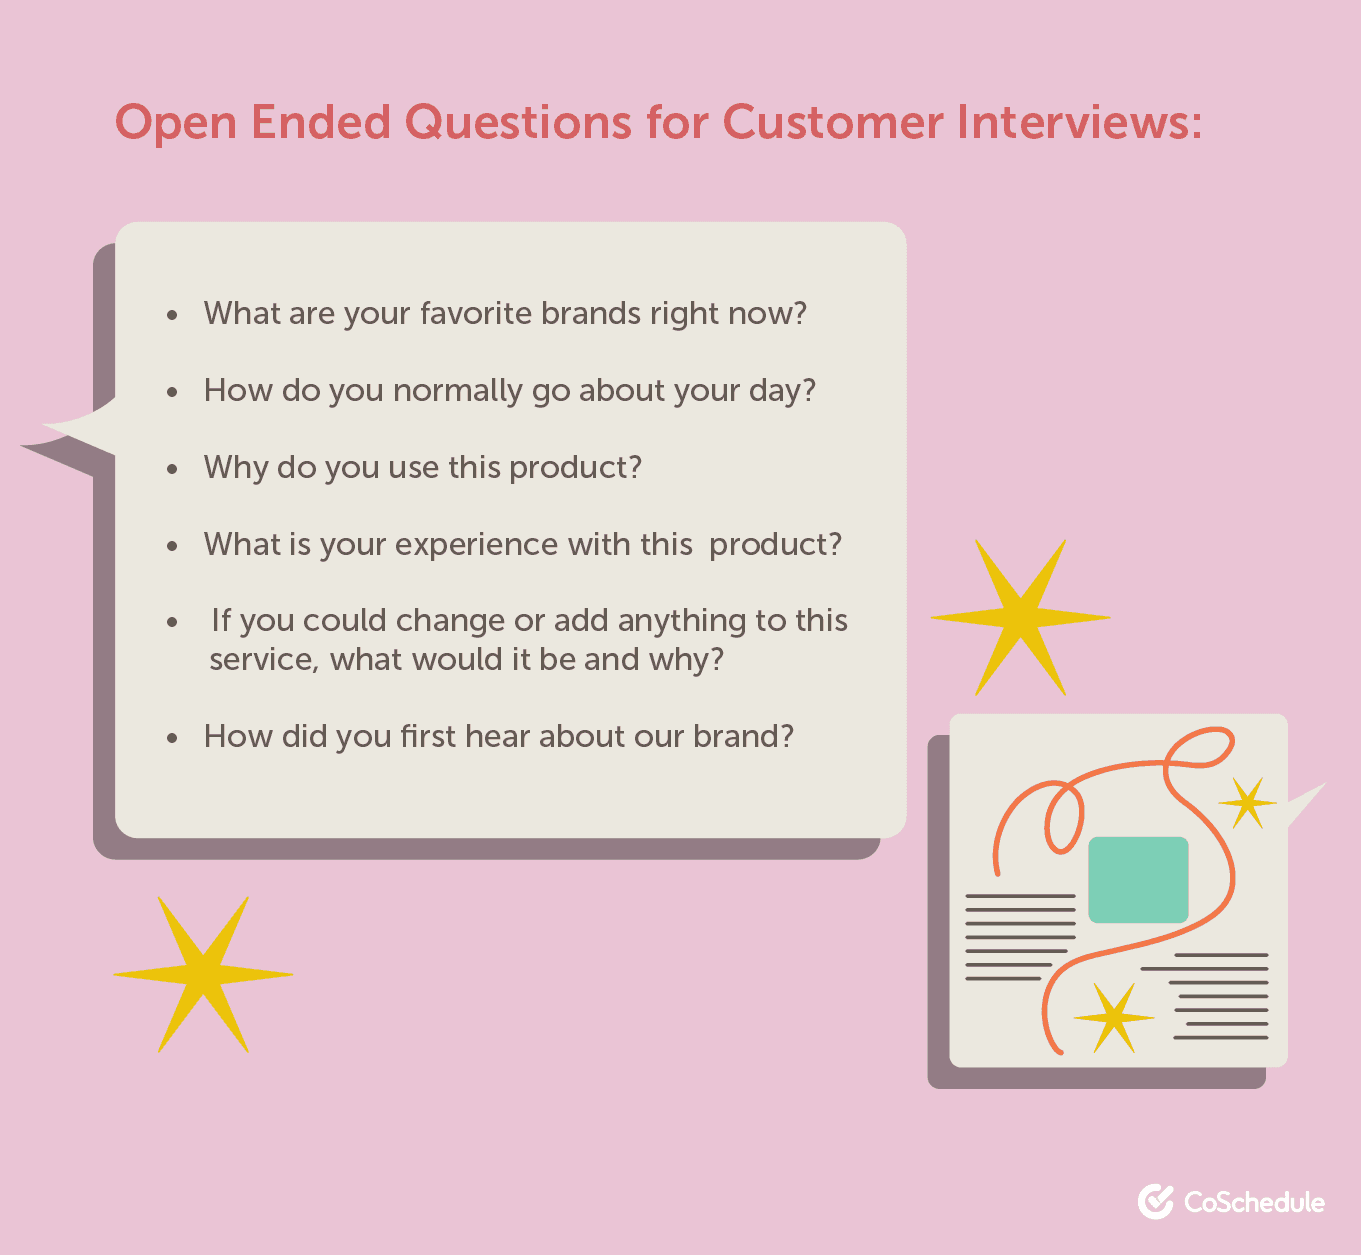 Open ended questions for interviews